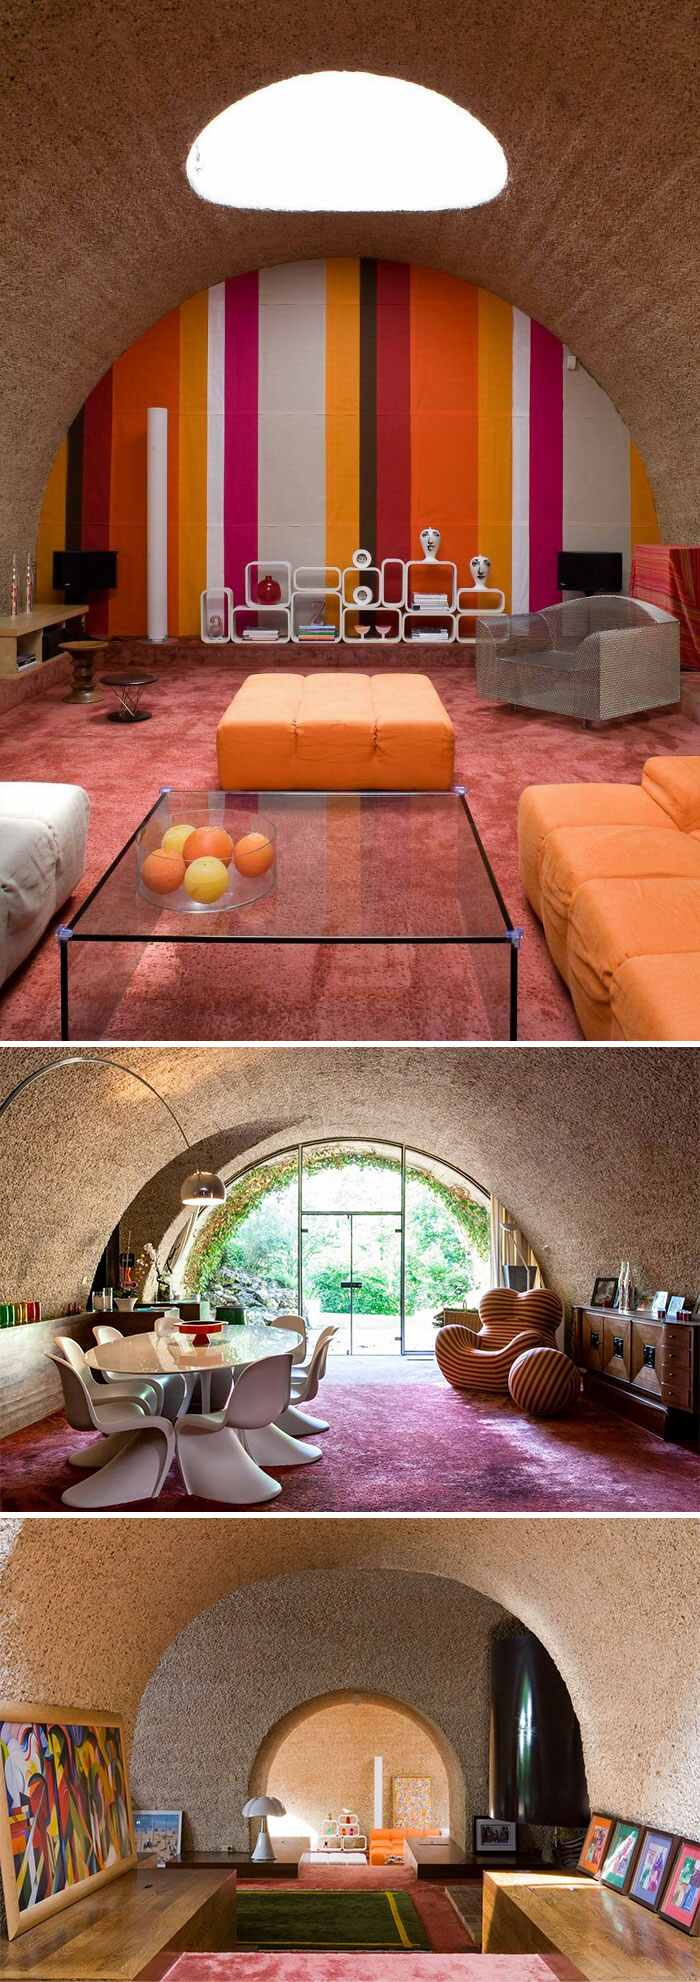 Underground Residence Of French Architect Étienne Fromanger, Designed In 1972